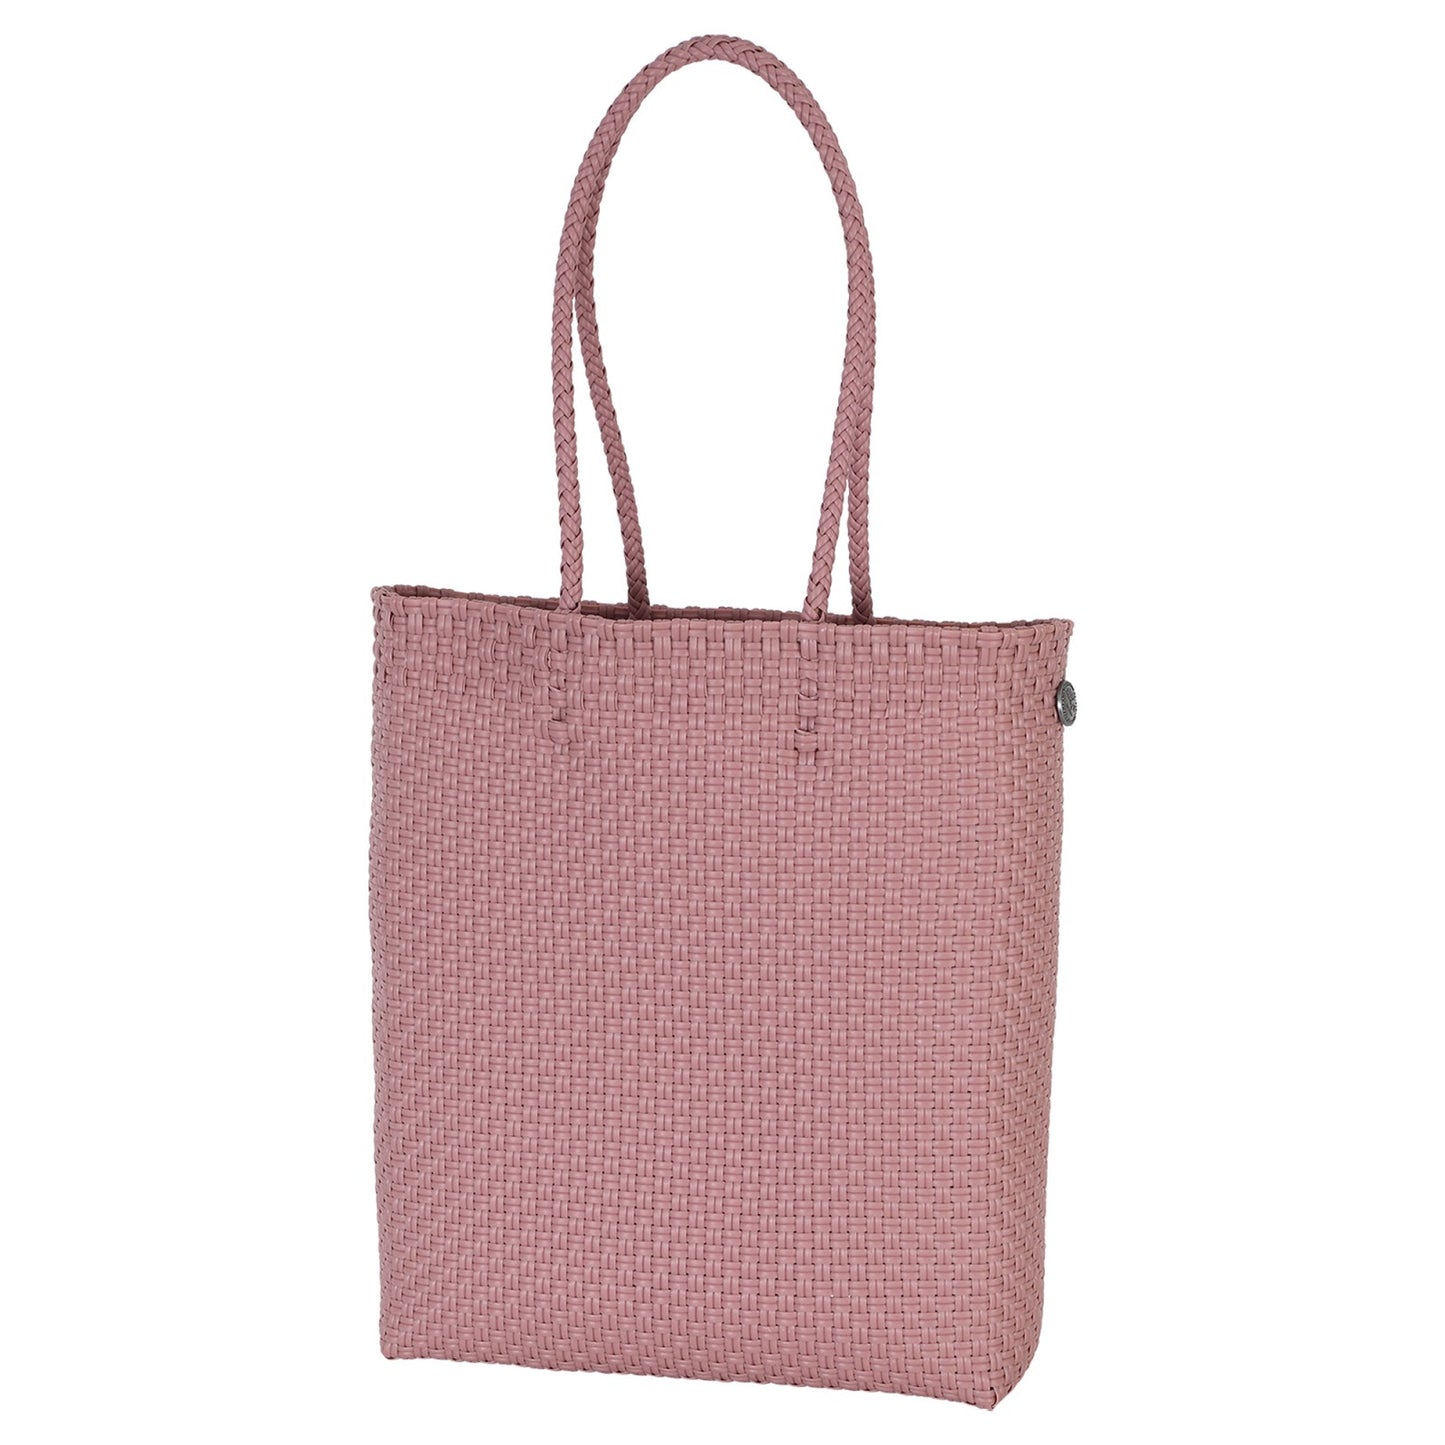 Handed By - SOLO tall shopper - 28 - rustic pink